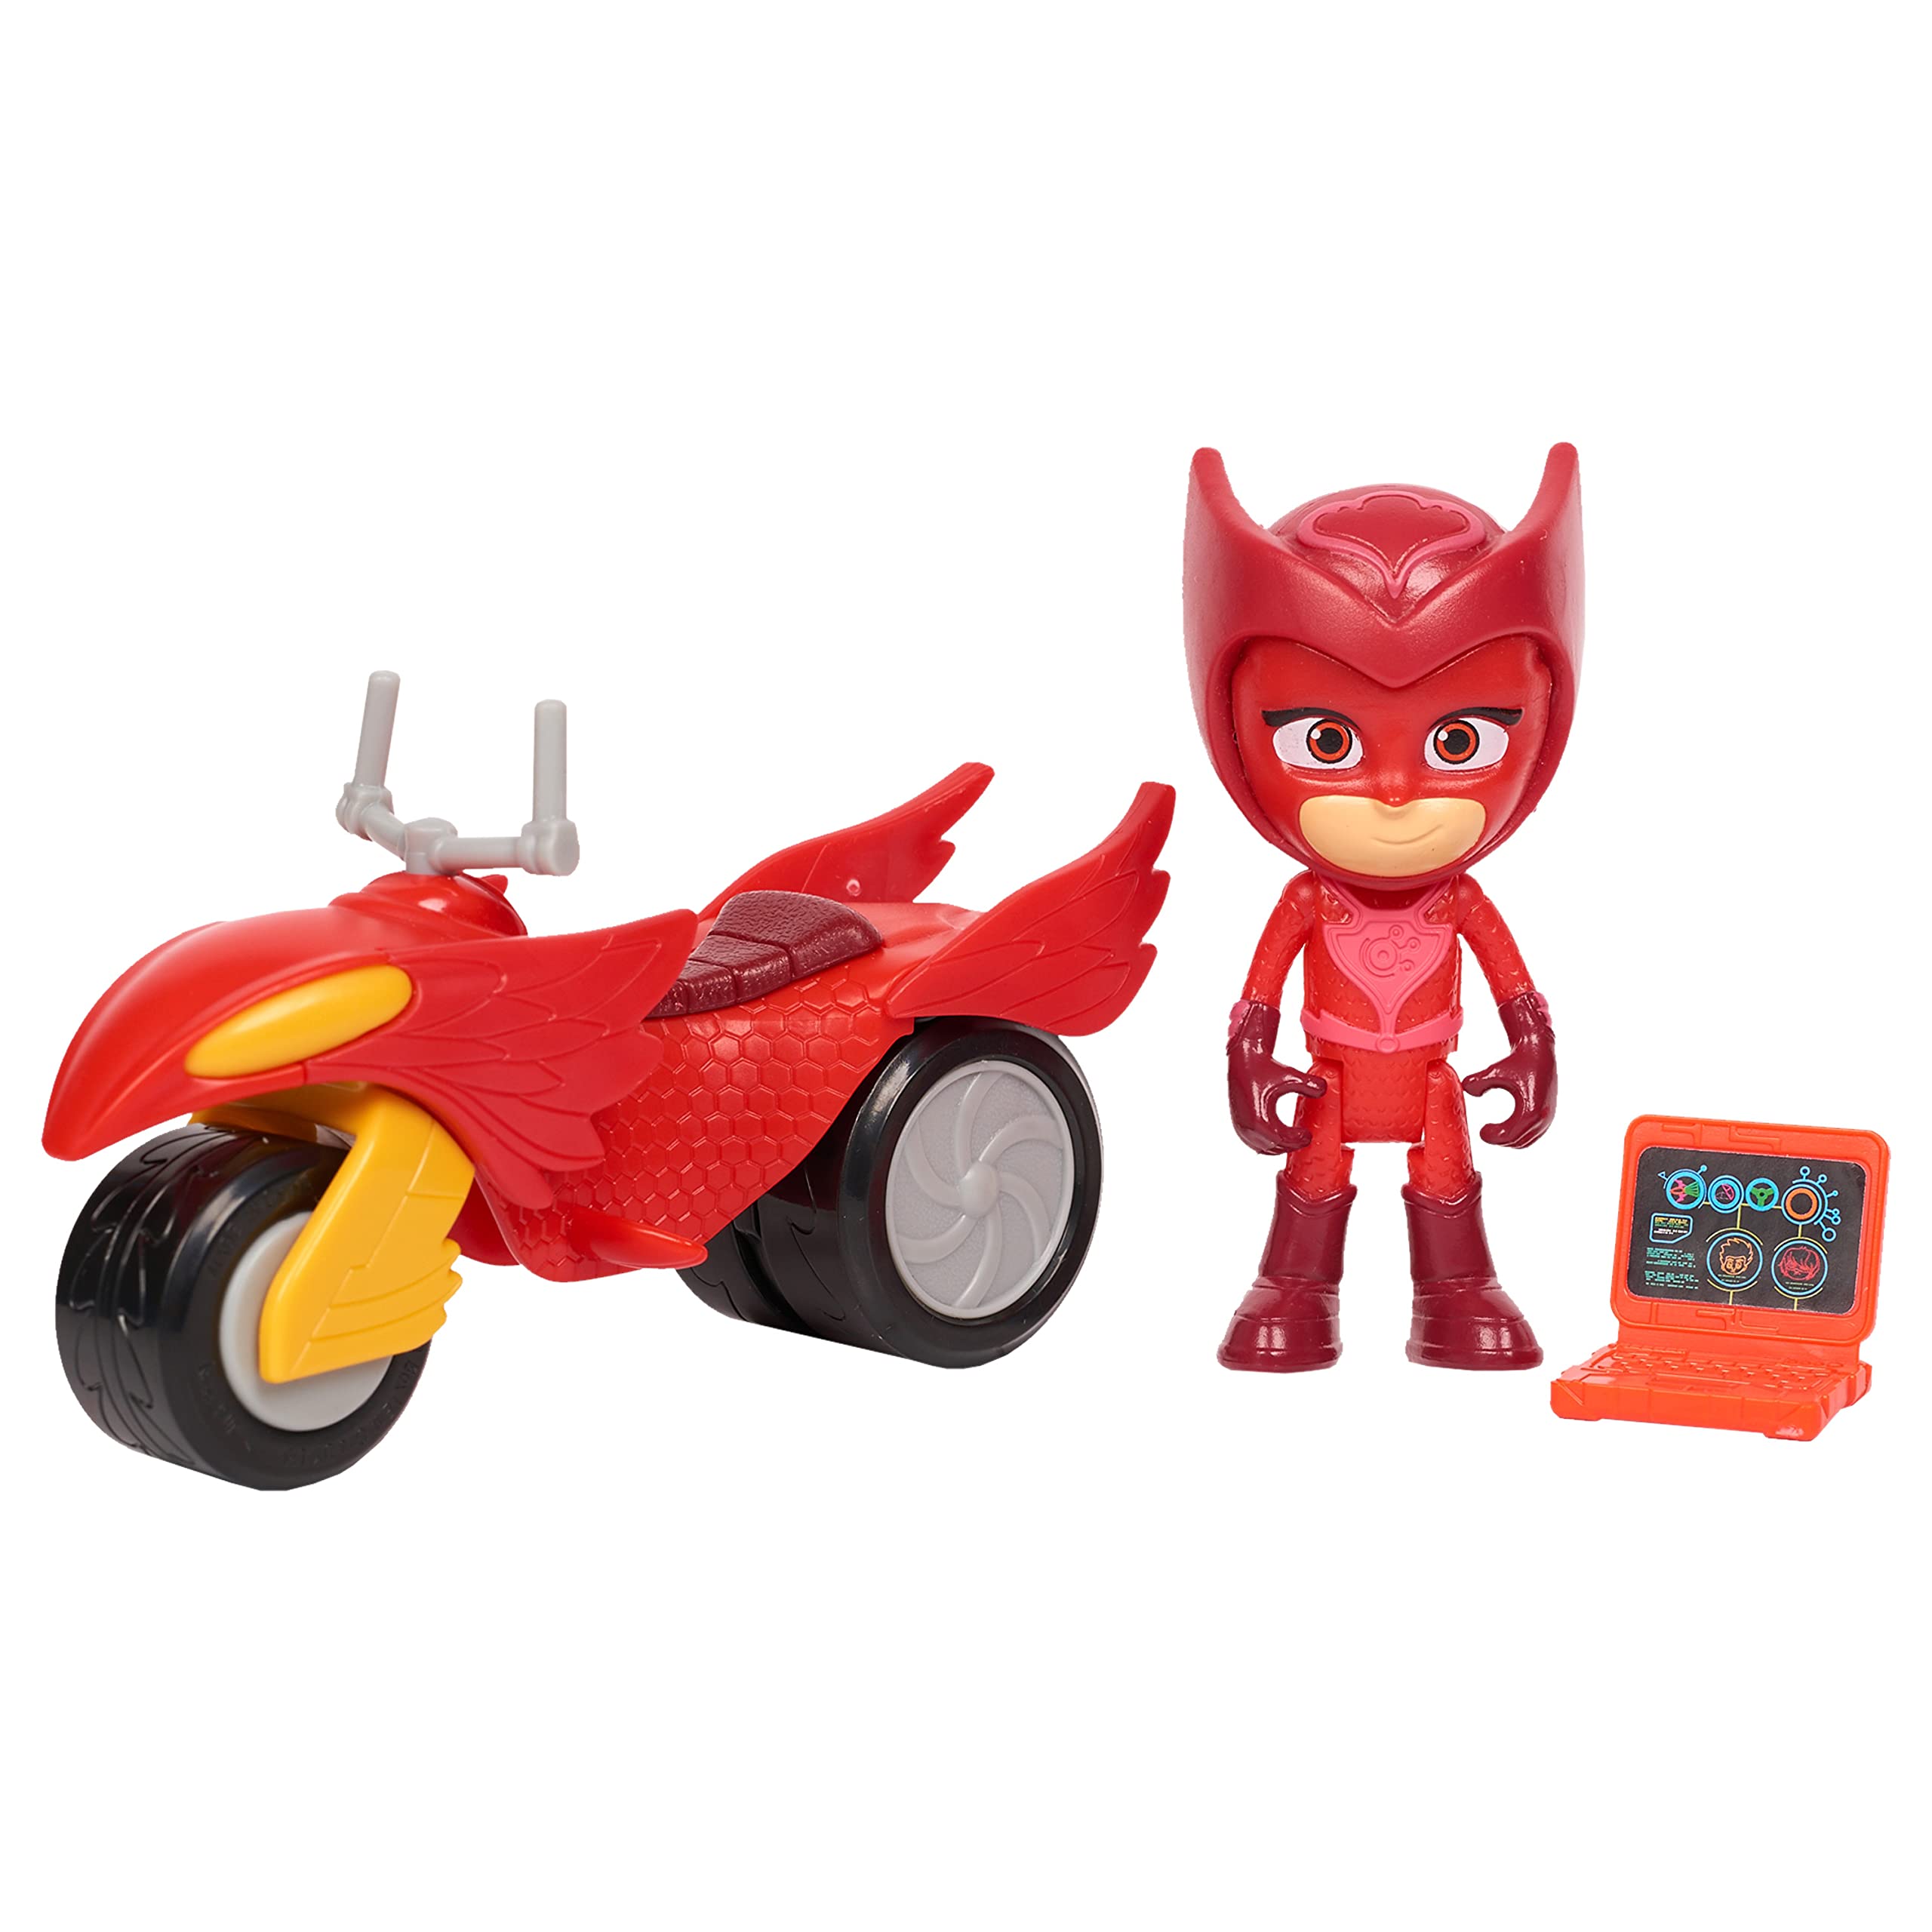 PJ Masks Super Moon Adventure Space Rover, Owlette, Kids Toys for Ages 3 Up, Gifts and Presents by Just Play